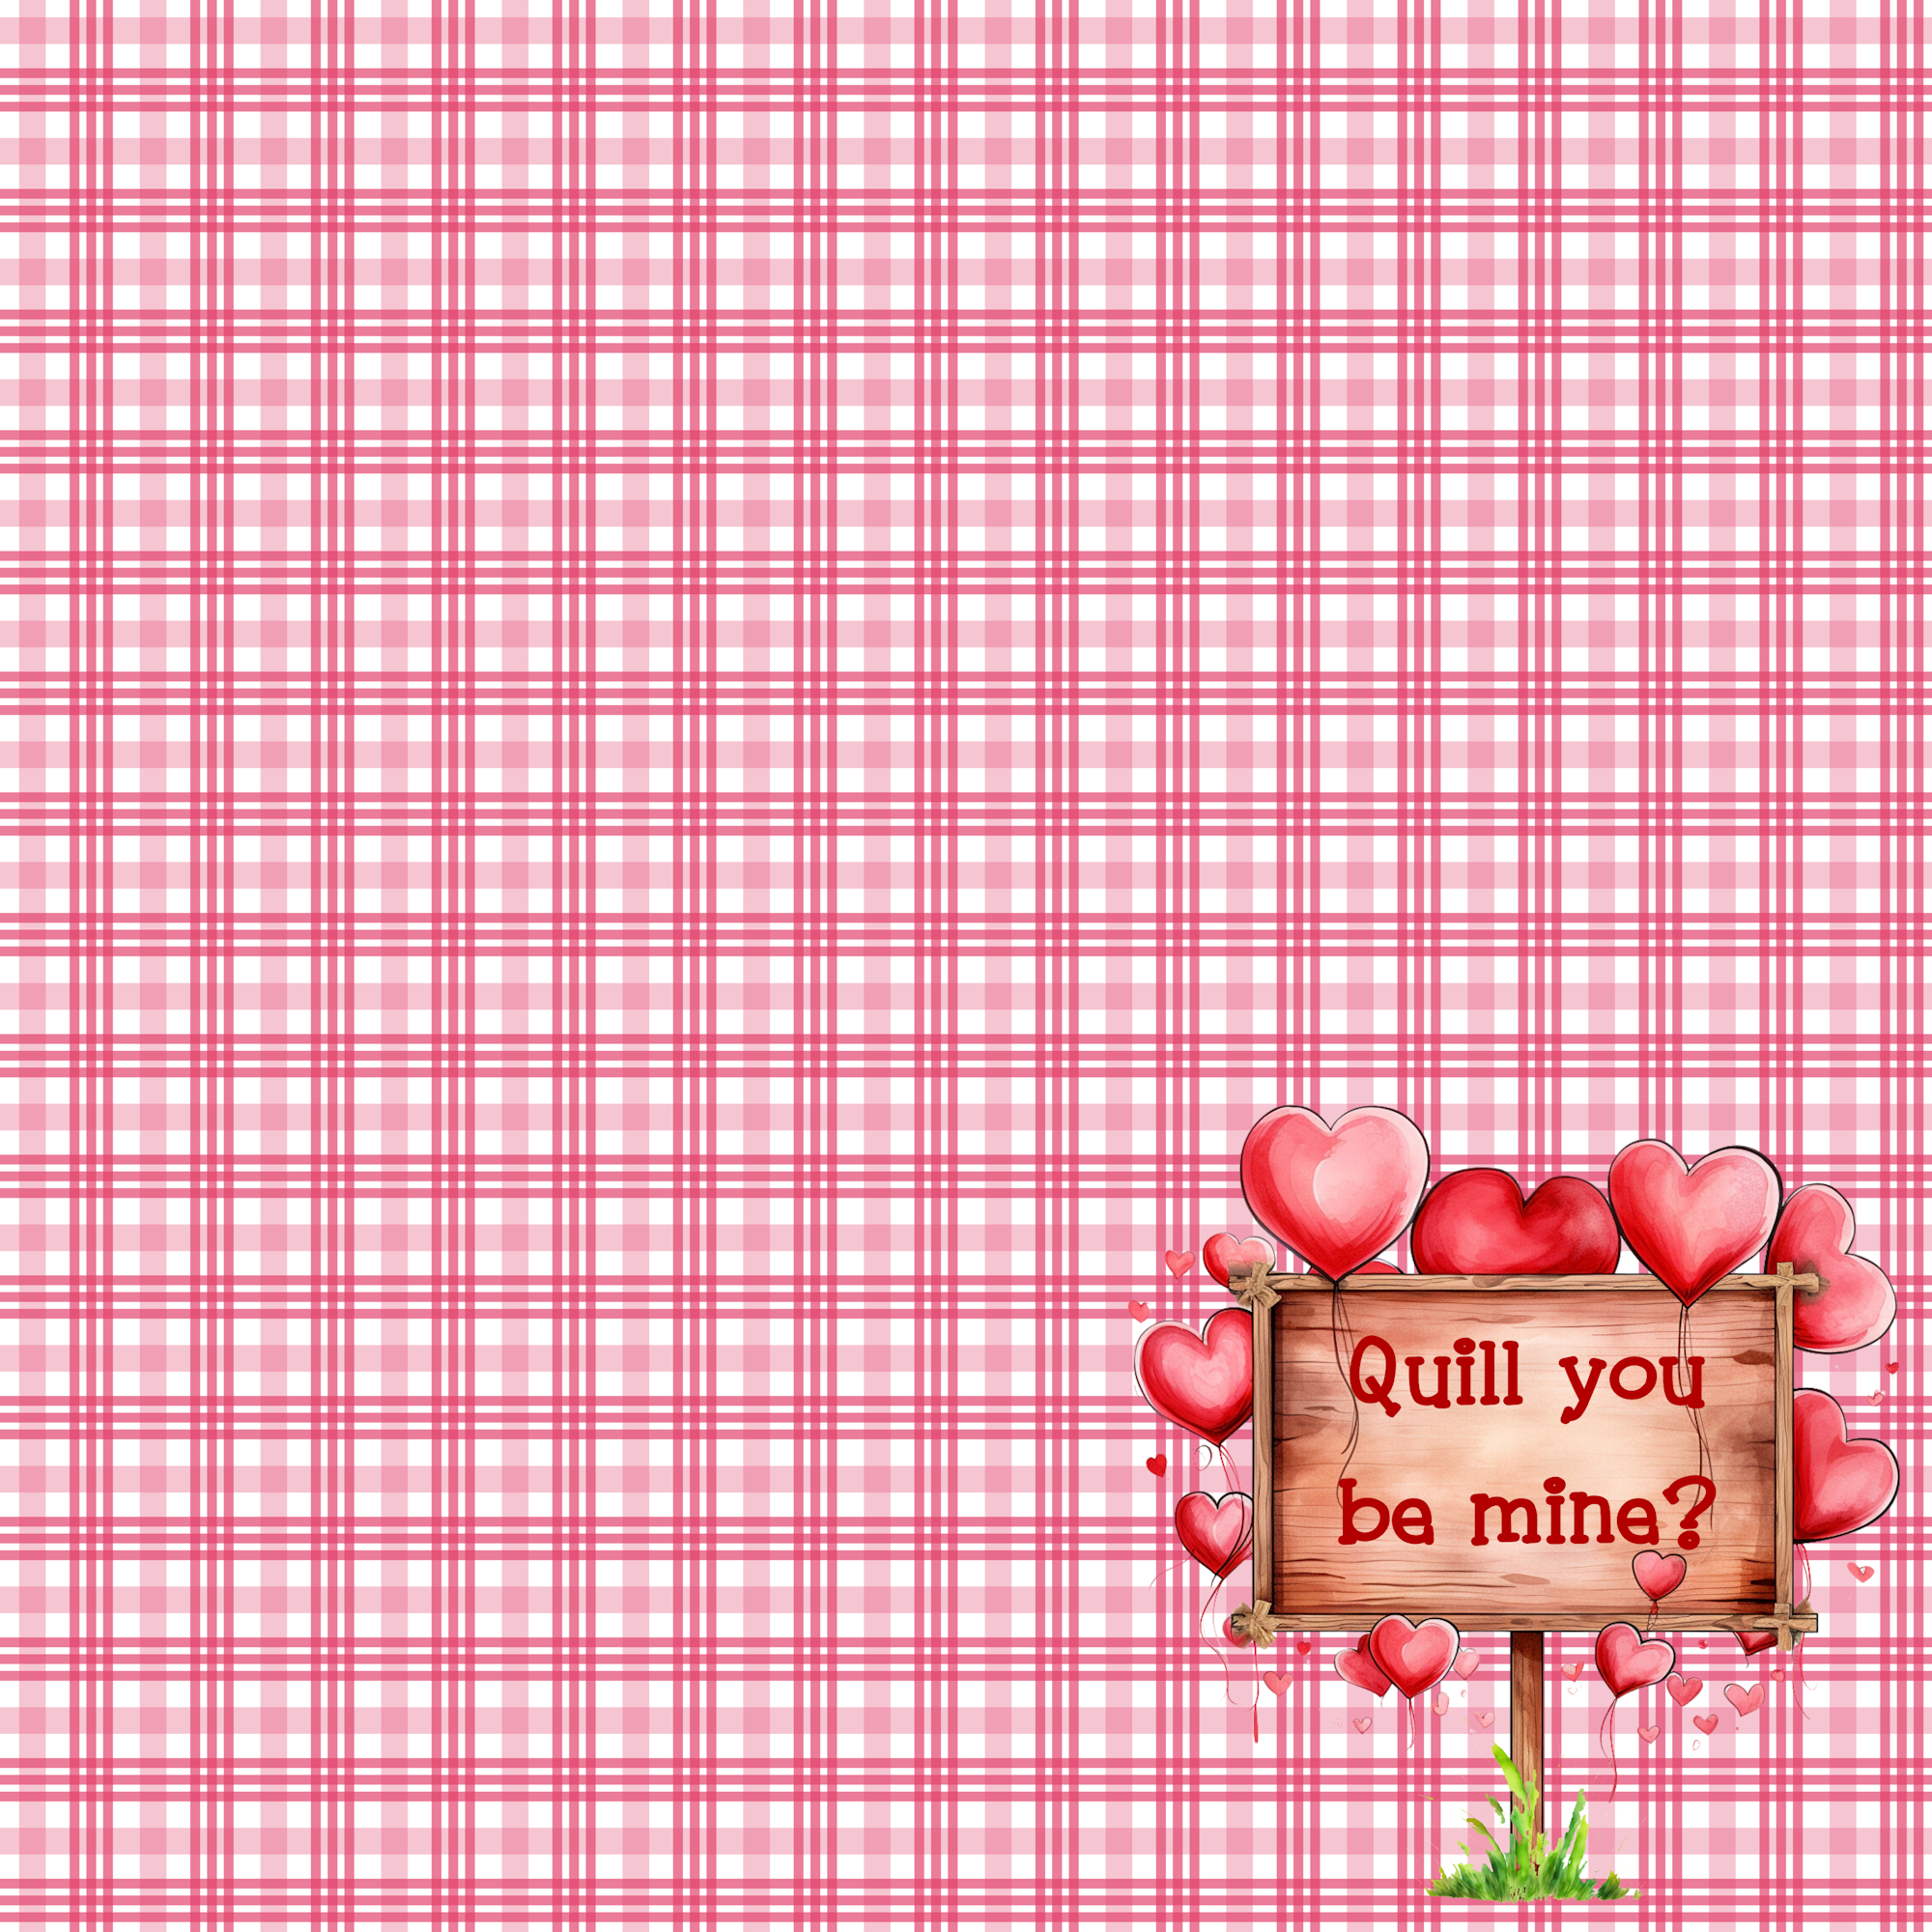 My Punny Valentine Collection Quill You Be Mine 12 x 12 Double-Sided Scrapbook Paper by SSC Designs